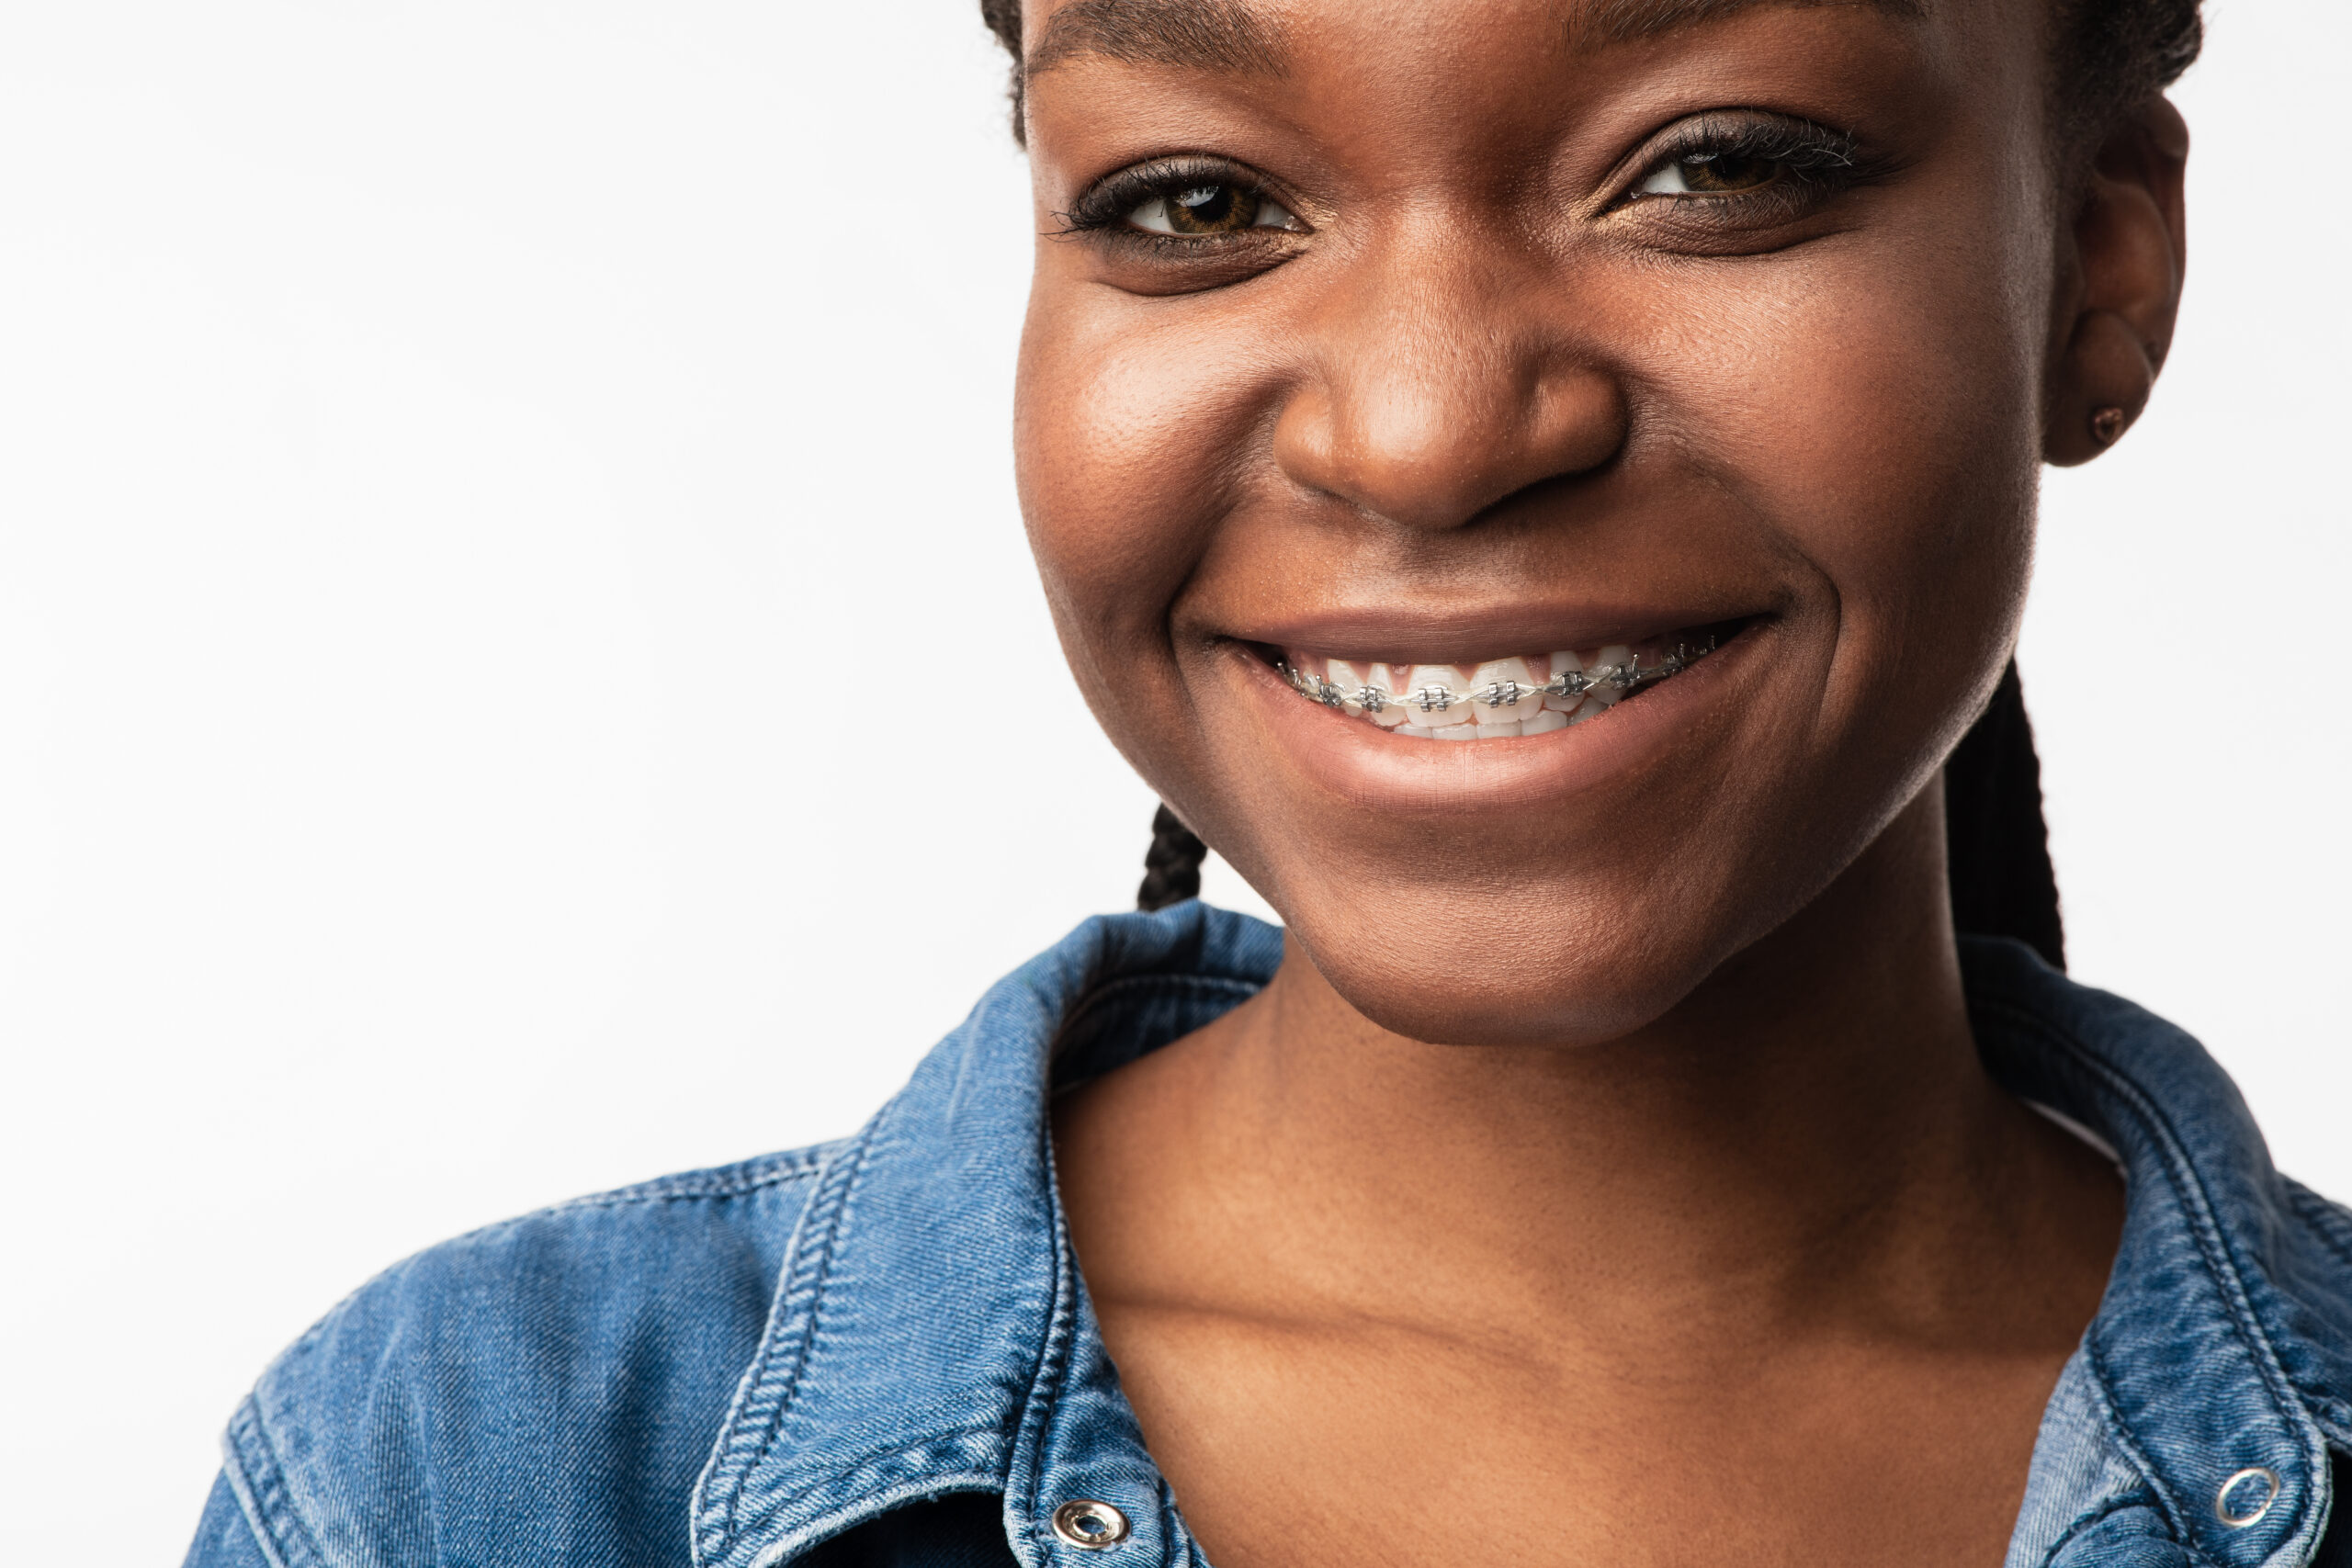 Dental Braces. Portrait Of African Girl With Brackets On Teeth Smiling To Camera Posing In Studio On White Background.